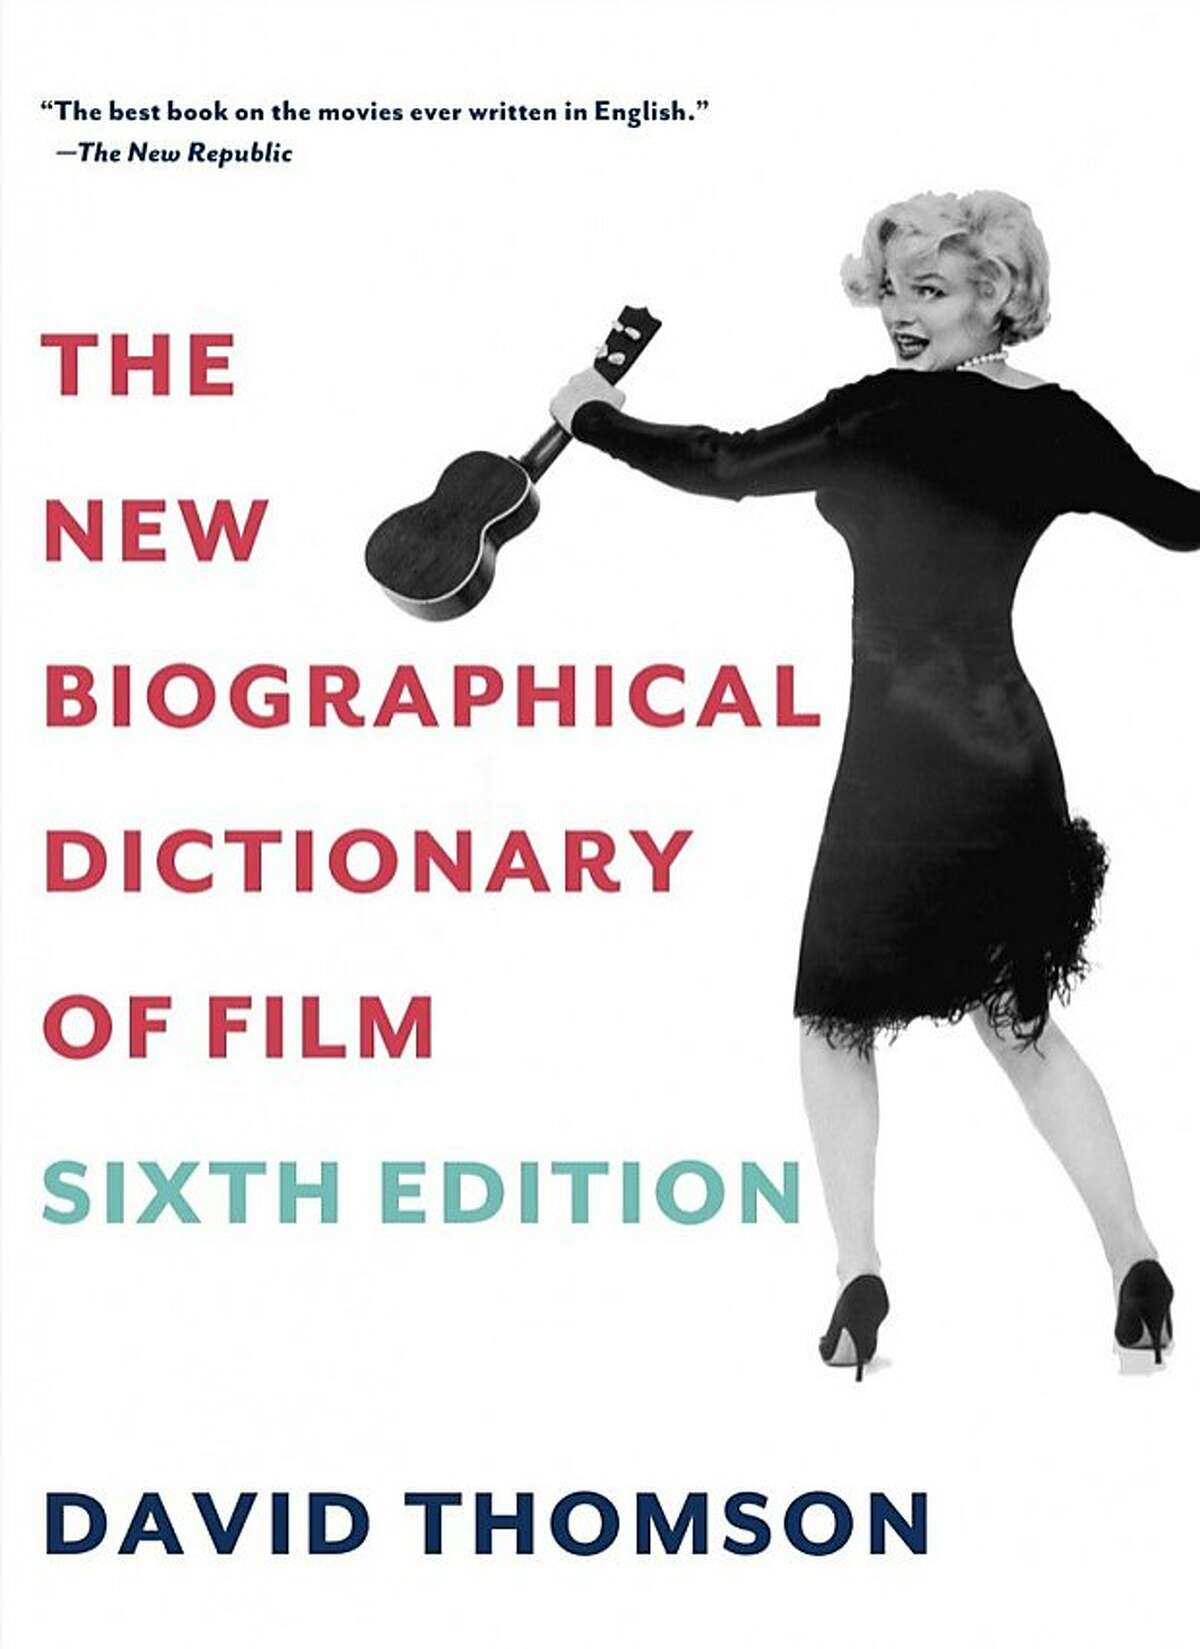 "The New Biographical Dictionary of Film: Sixth Edition," by David Thomson